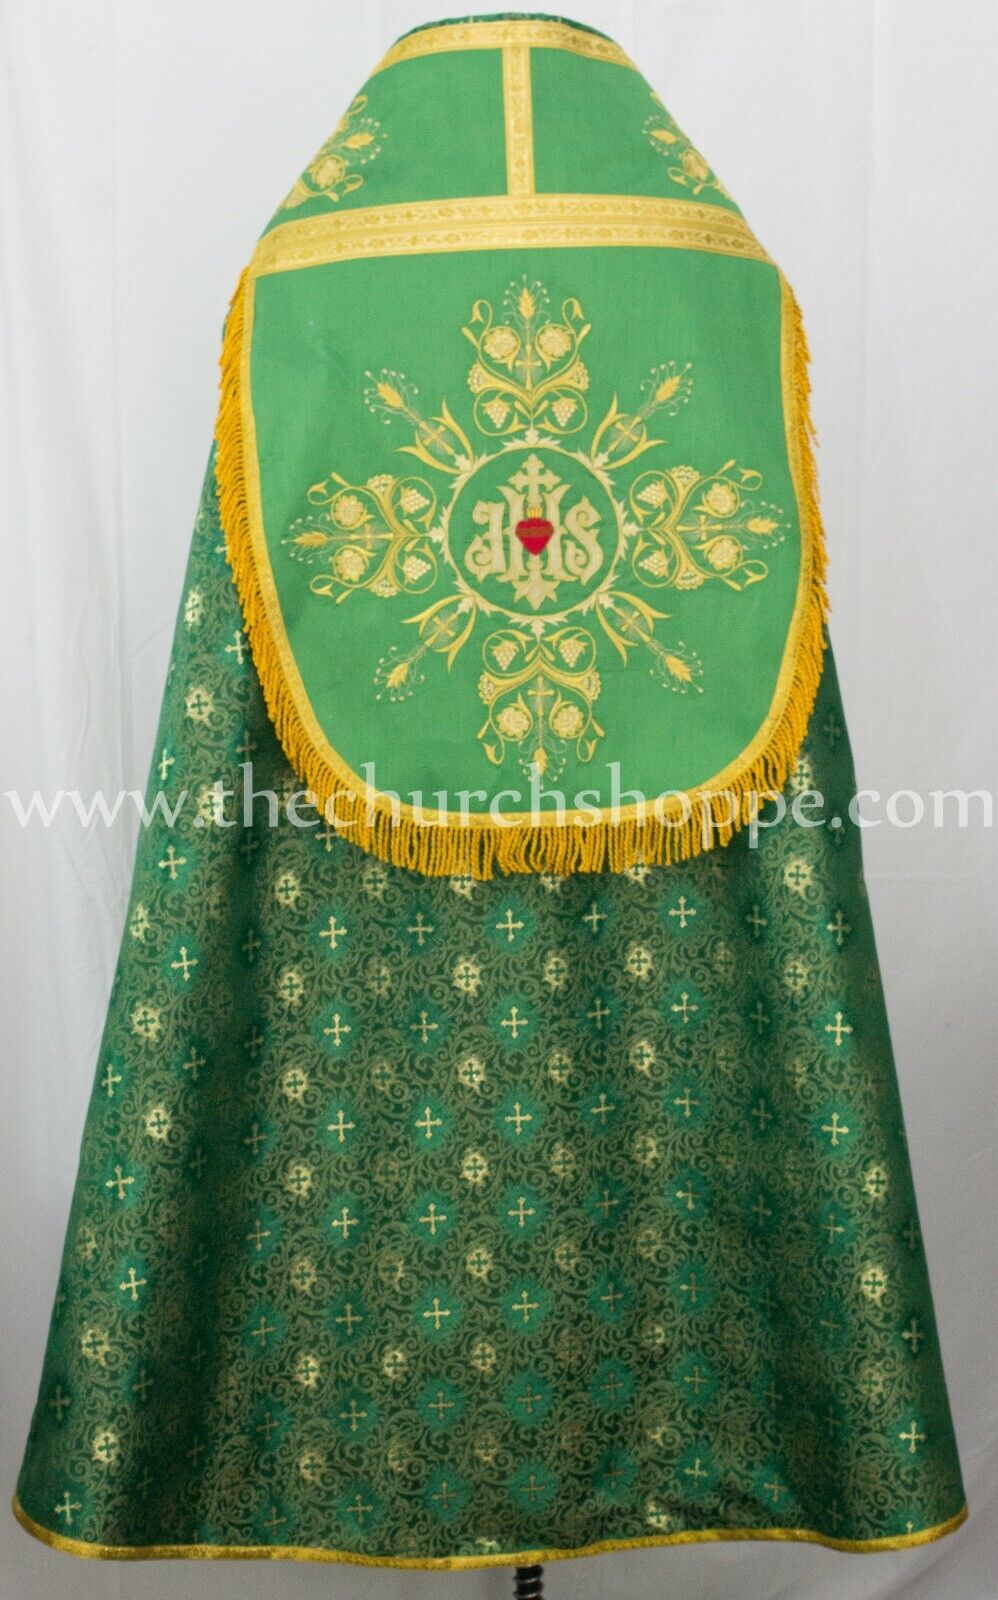 NEW Metallic Green Cope & Stole Set with IHS embroidery,capa pluvial,far fronte